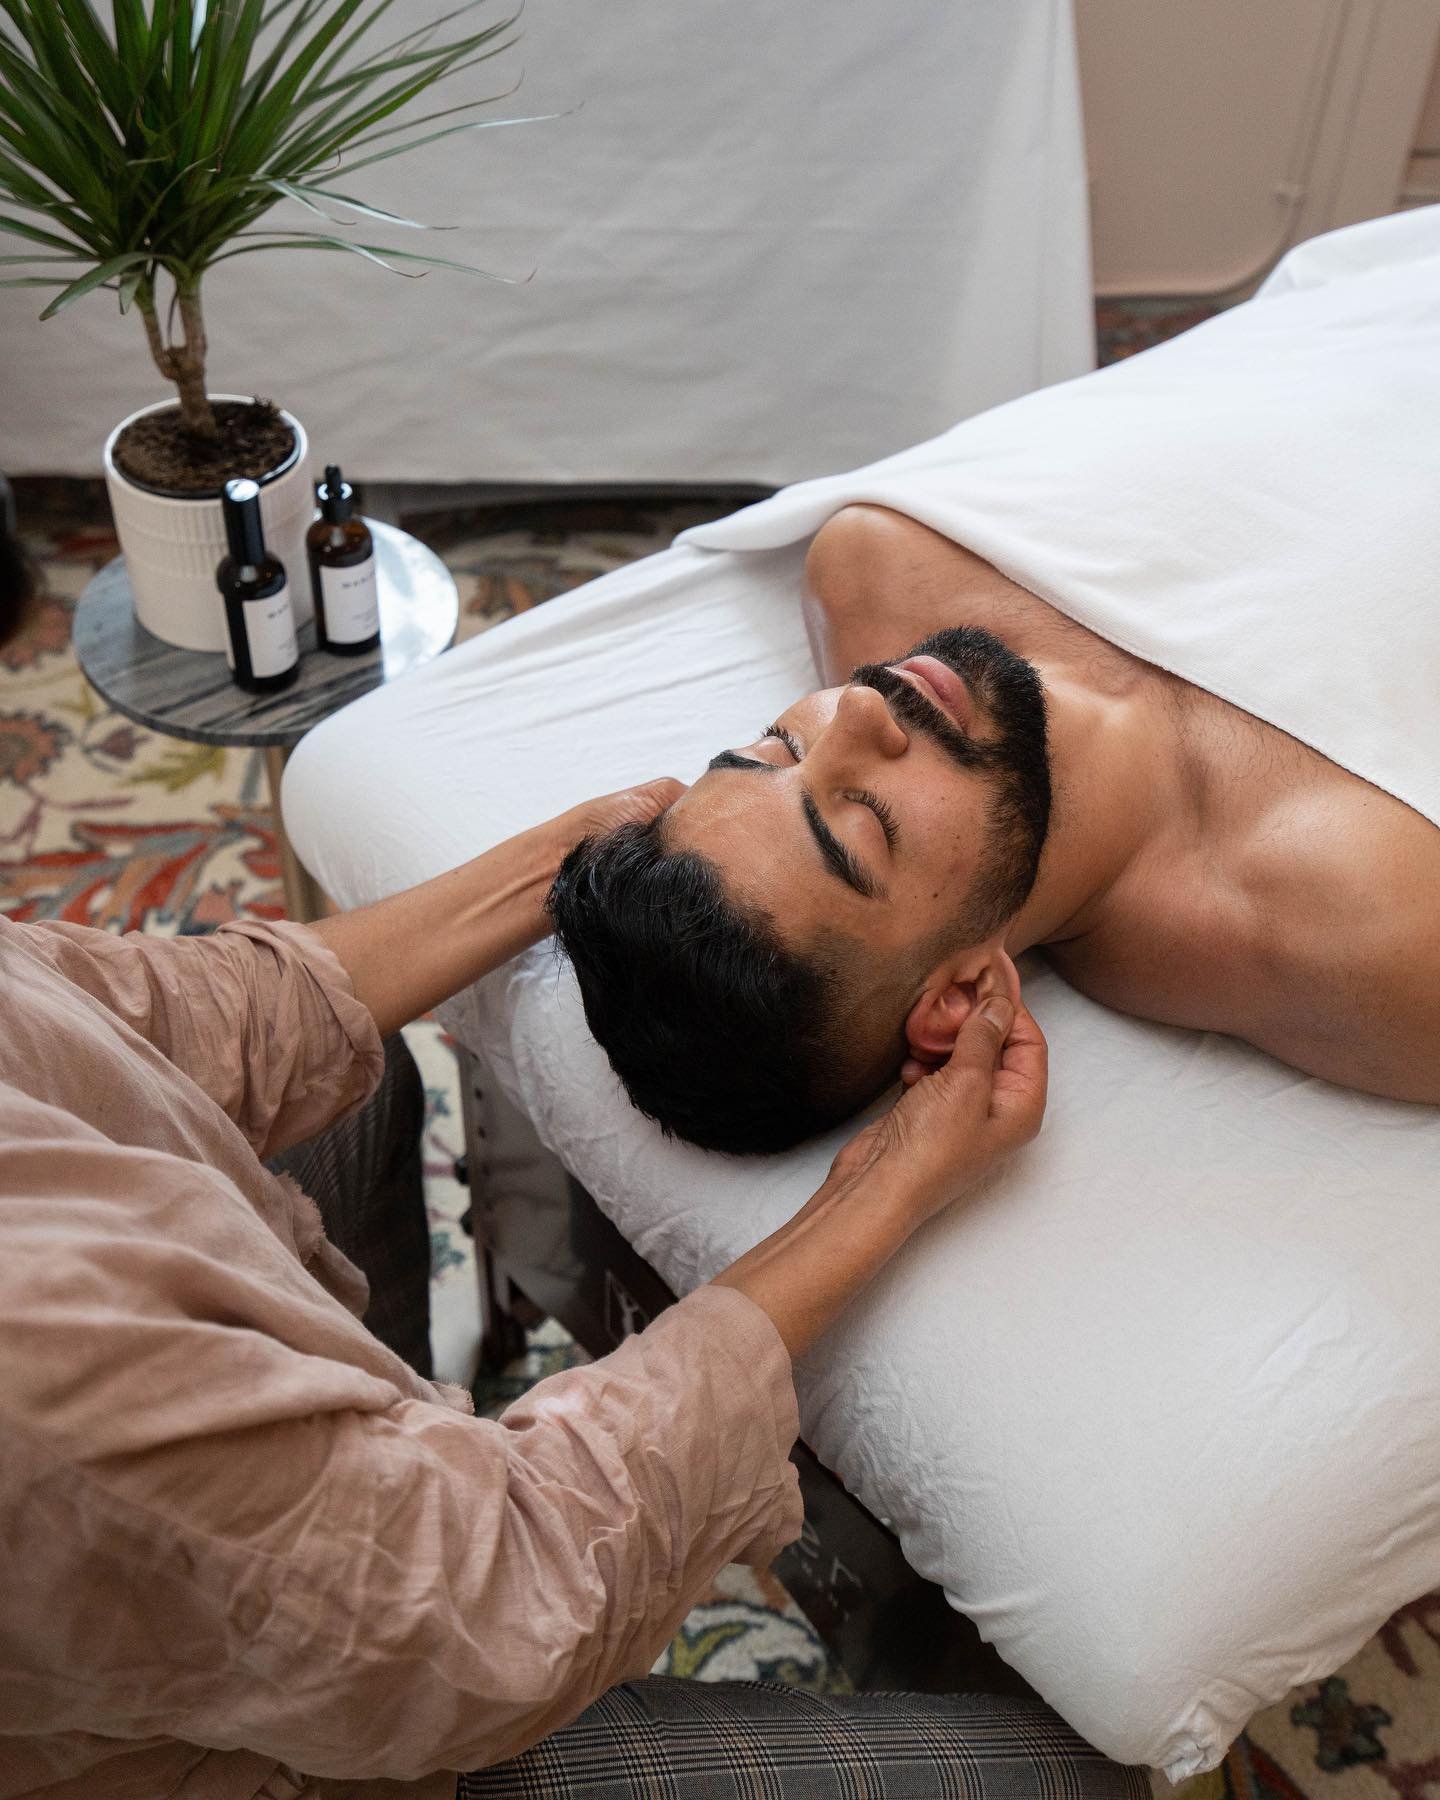 ✨Luxurious Self Care Experiences✨

One of our newest treatments - The Real Indulgence Abhyanga with Abdominal and Facial Massage - is 90-minutes of pure bliss. Enjoy a full-body and head Abhyanga massage + an abdominal and facial massage with high-qu